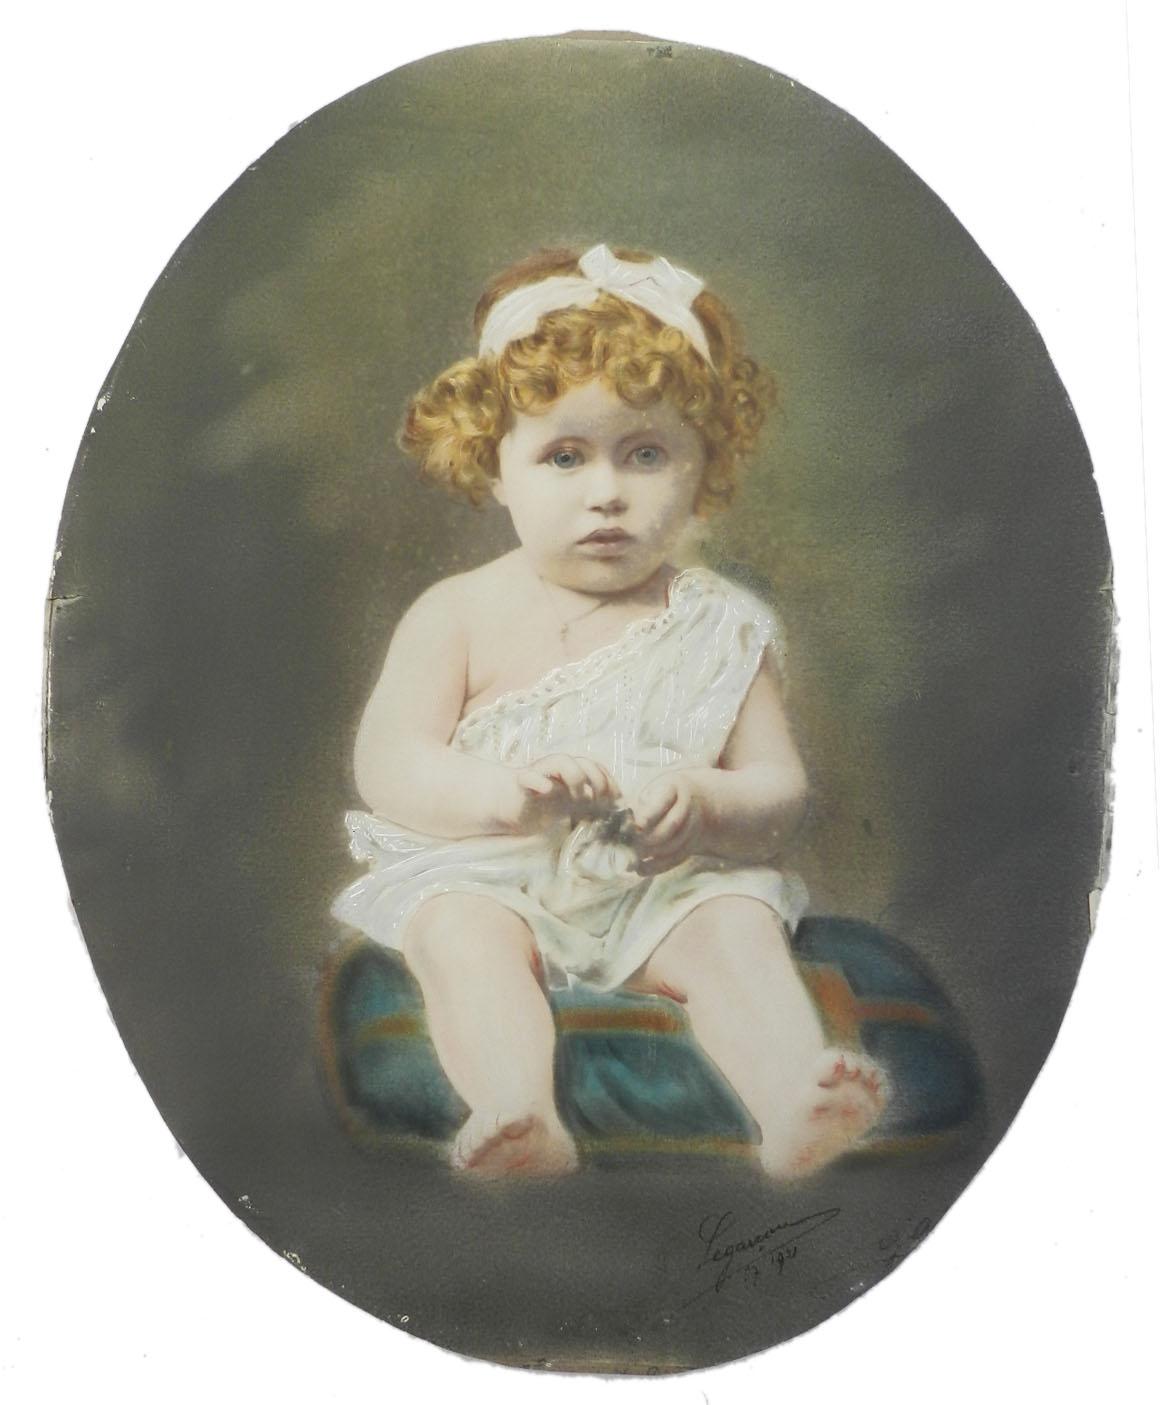 Unknown Portrait Photograph - Antique Photograph of a Young Child by French Photographer Legarcon 1921 Framed